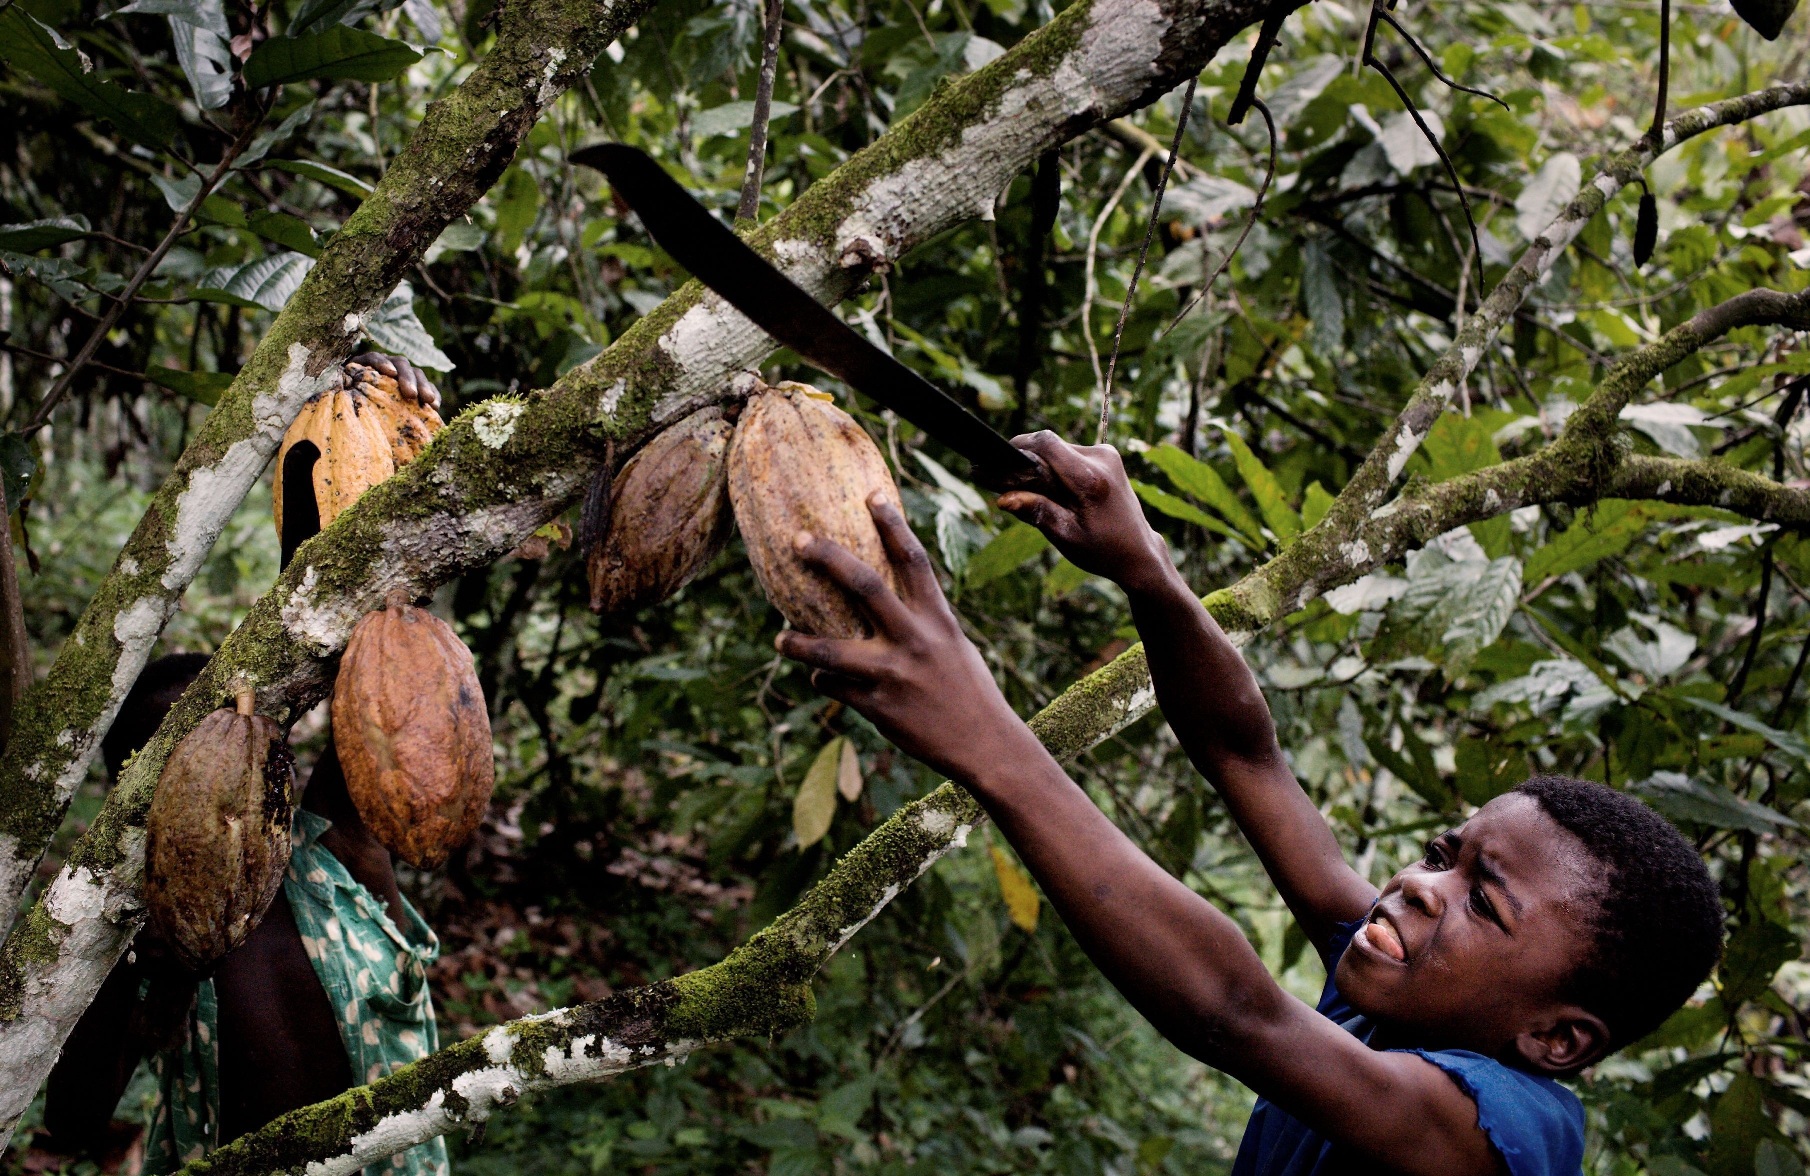 child labor in West Africa, chocolate